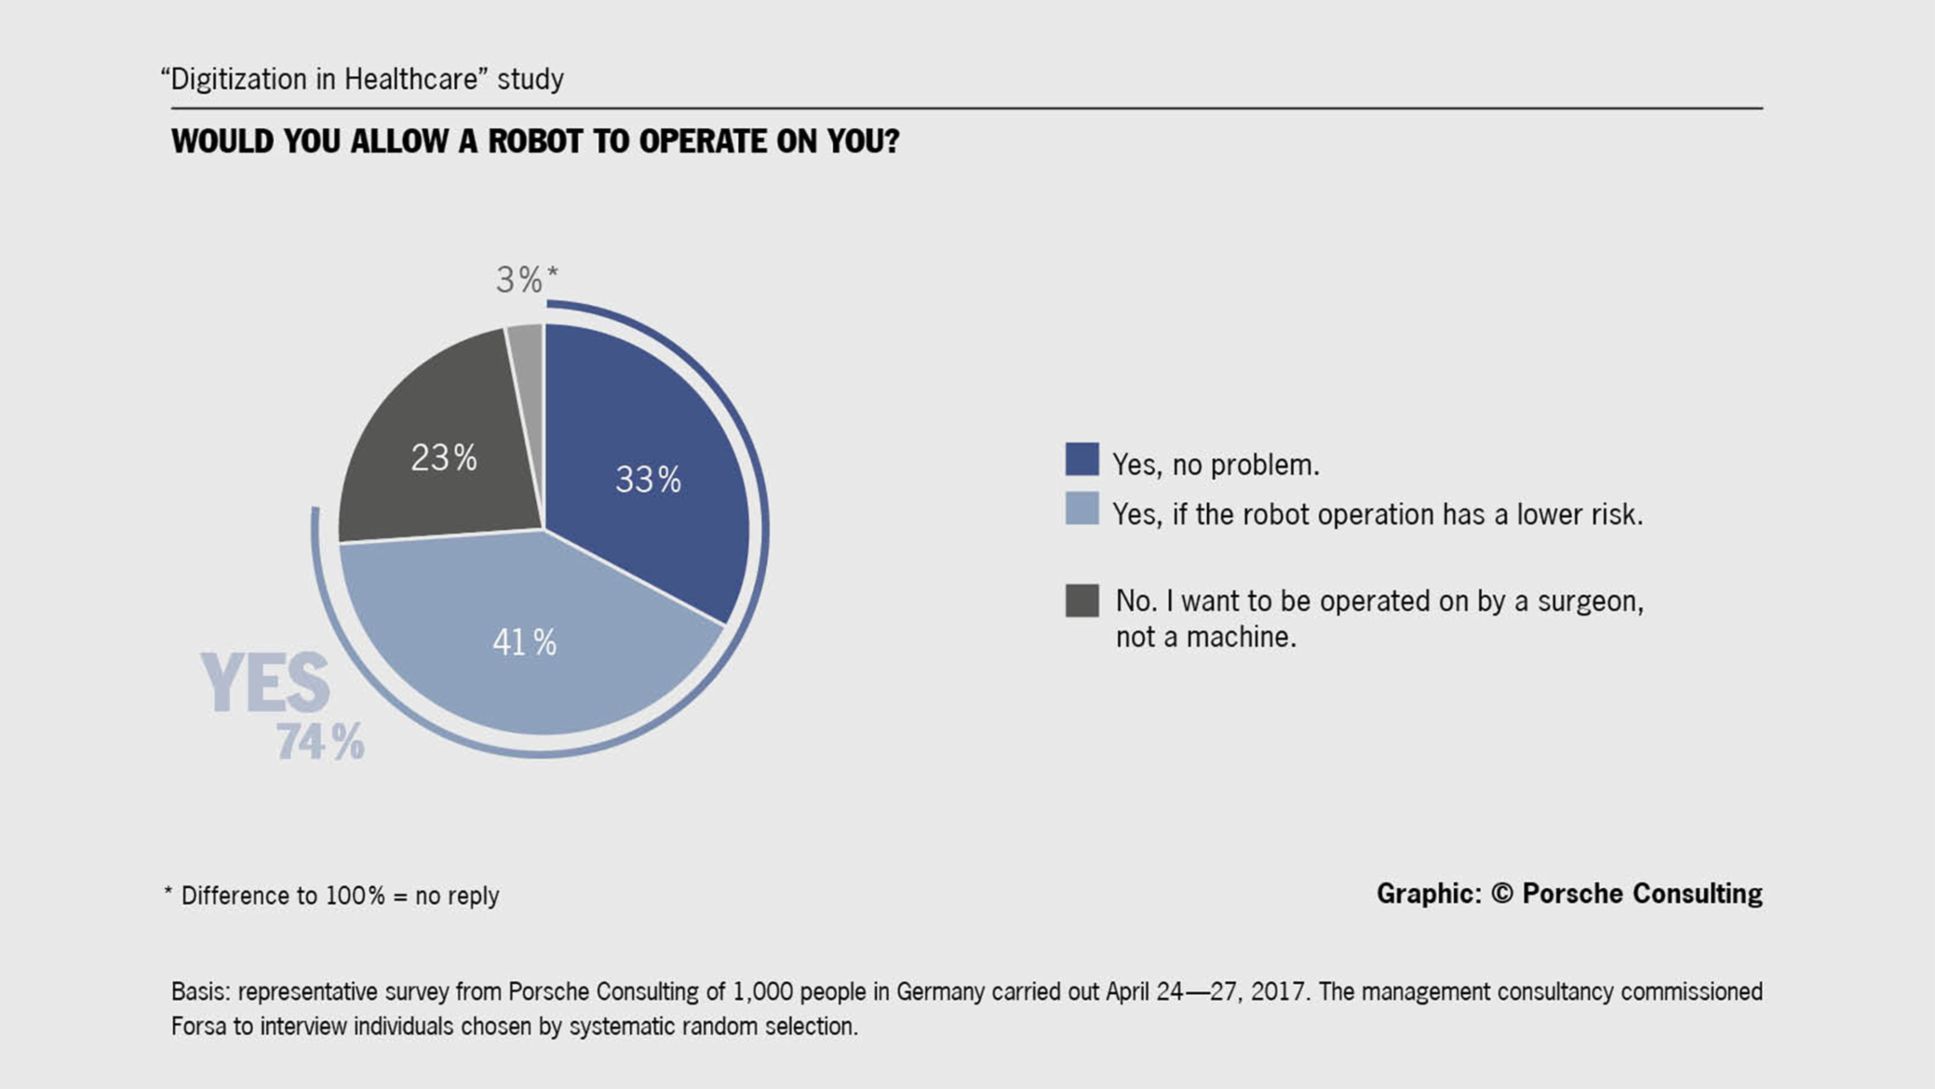 "Digitization in Healthcare” study: Would you allow a robot to operate on you?, 2017, Porsche Consulting